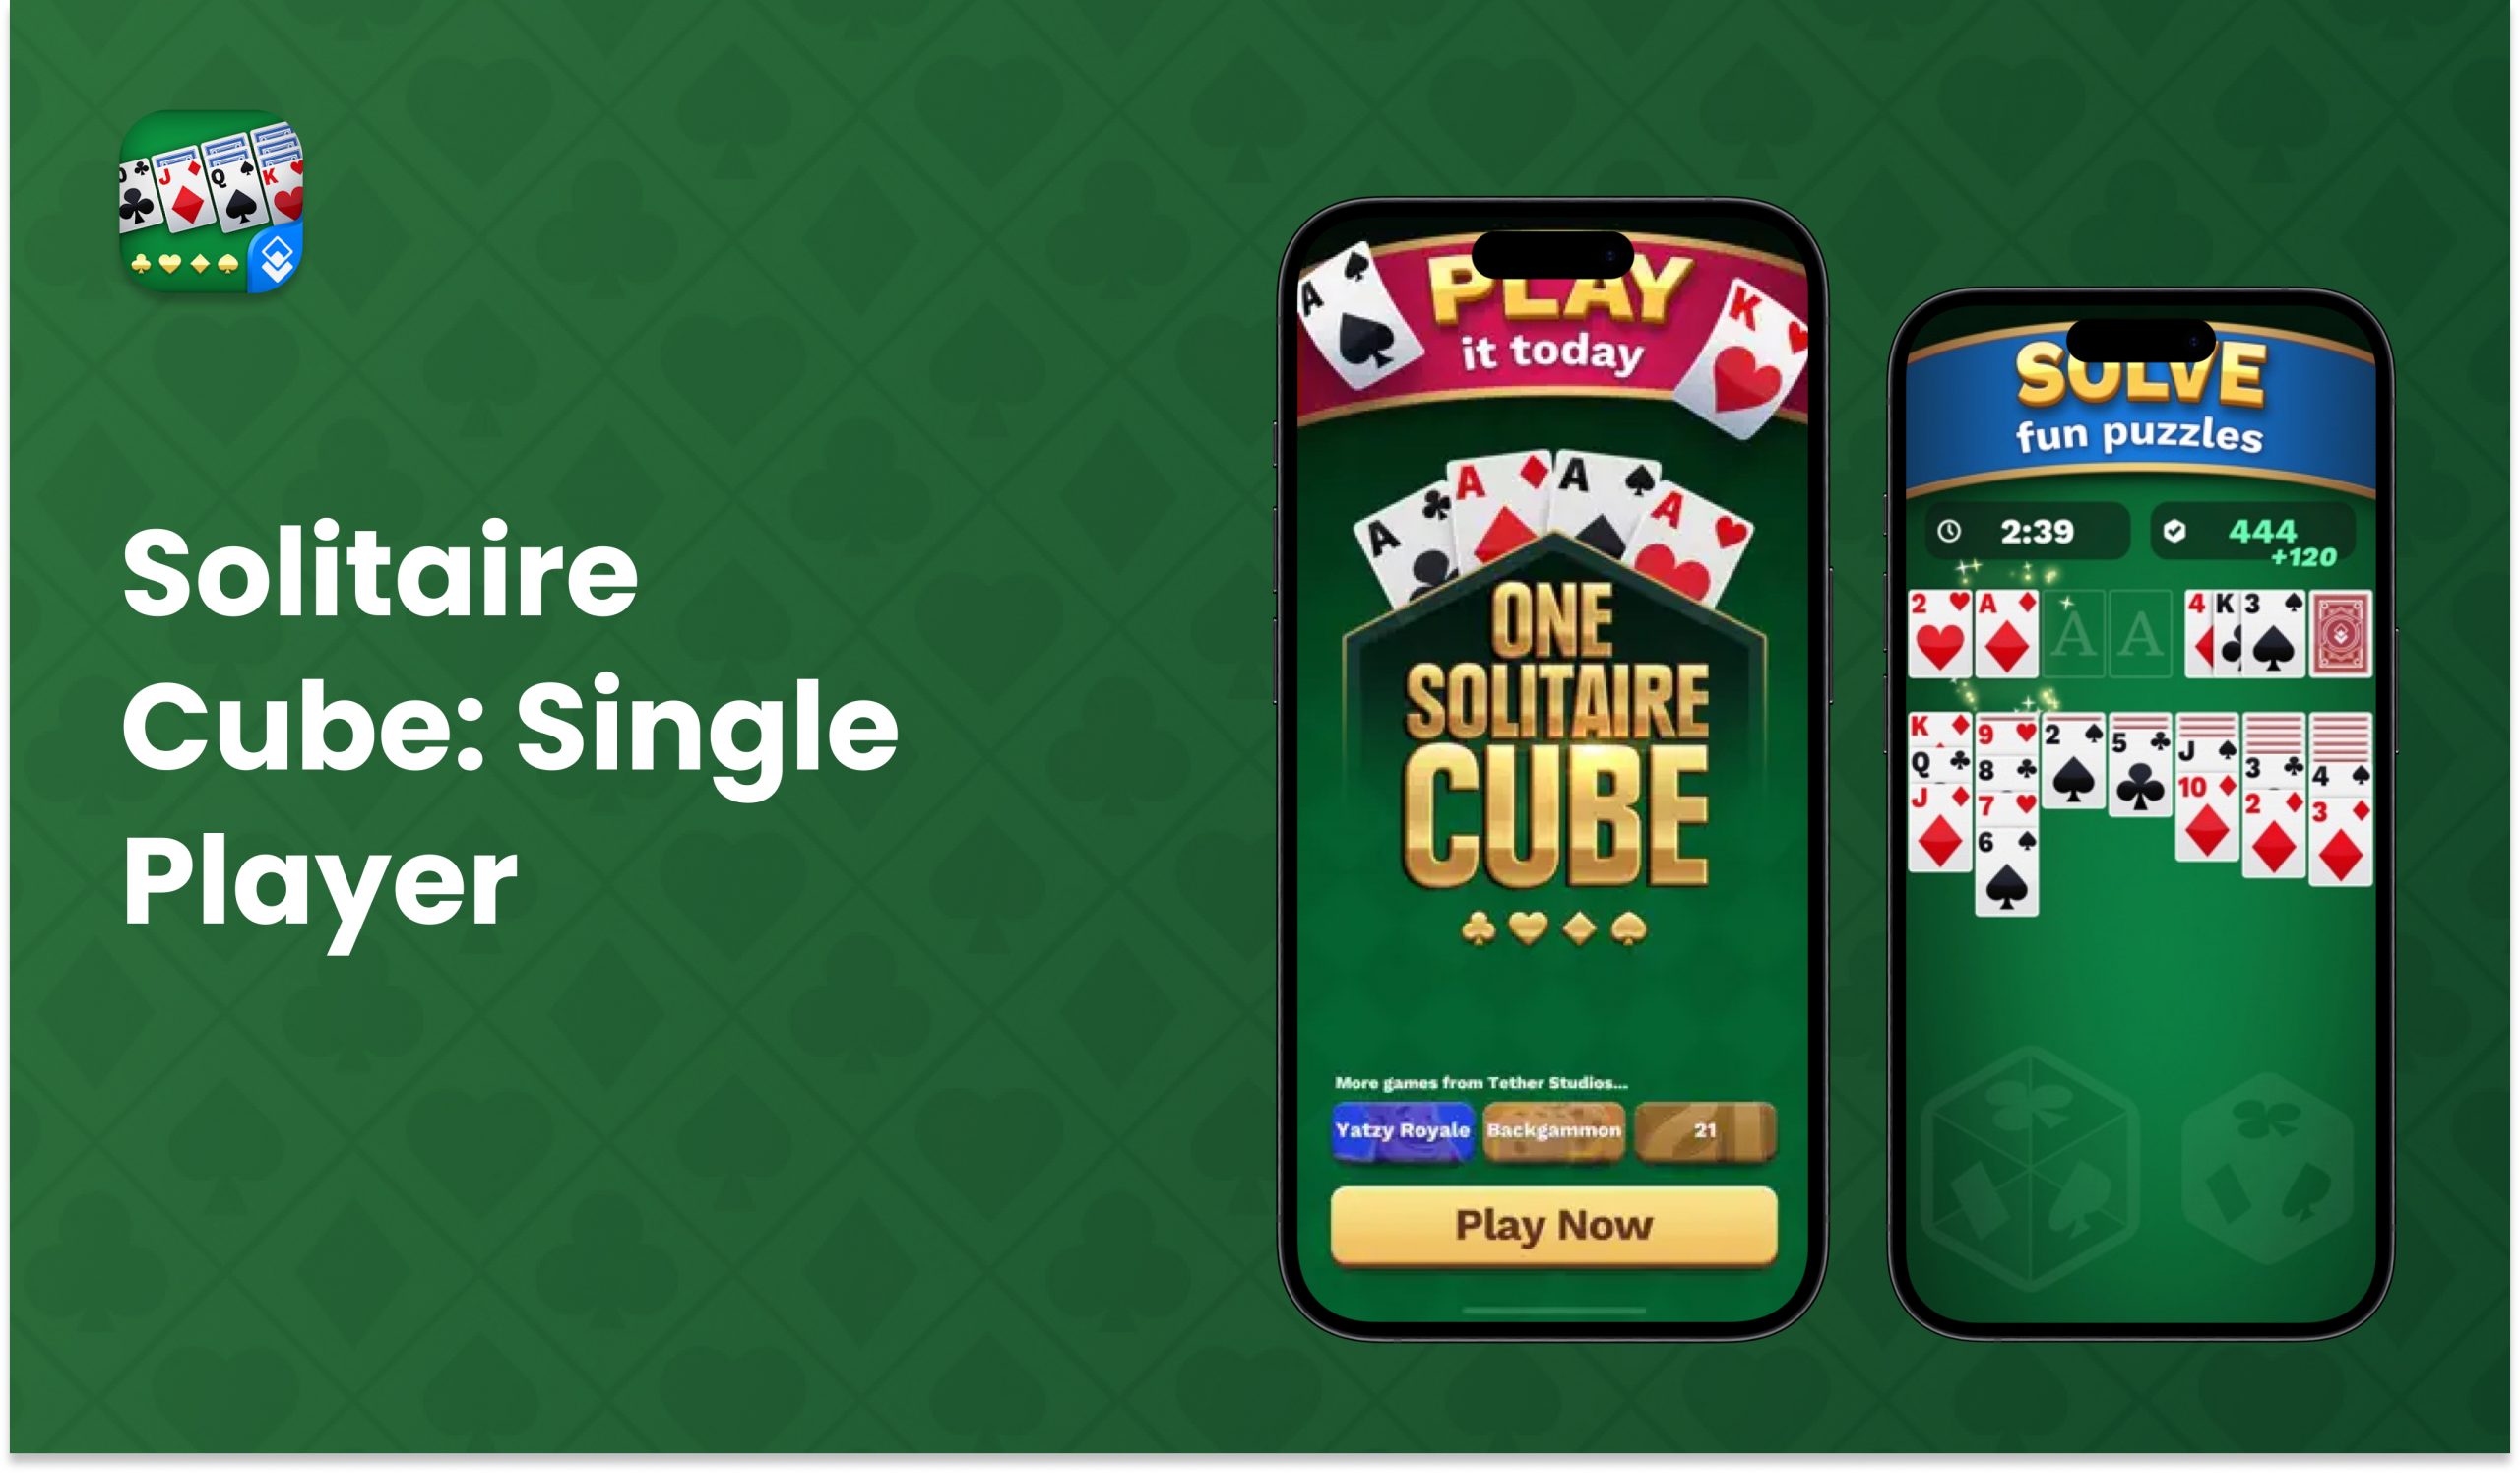 Solitaire Cube: Classic Card Game with Real Cash Rewards